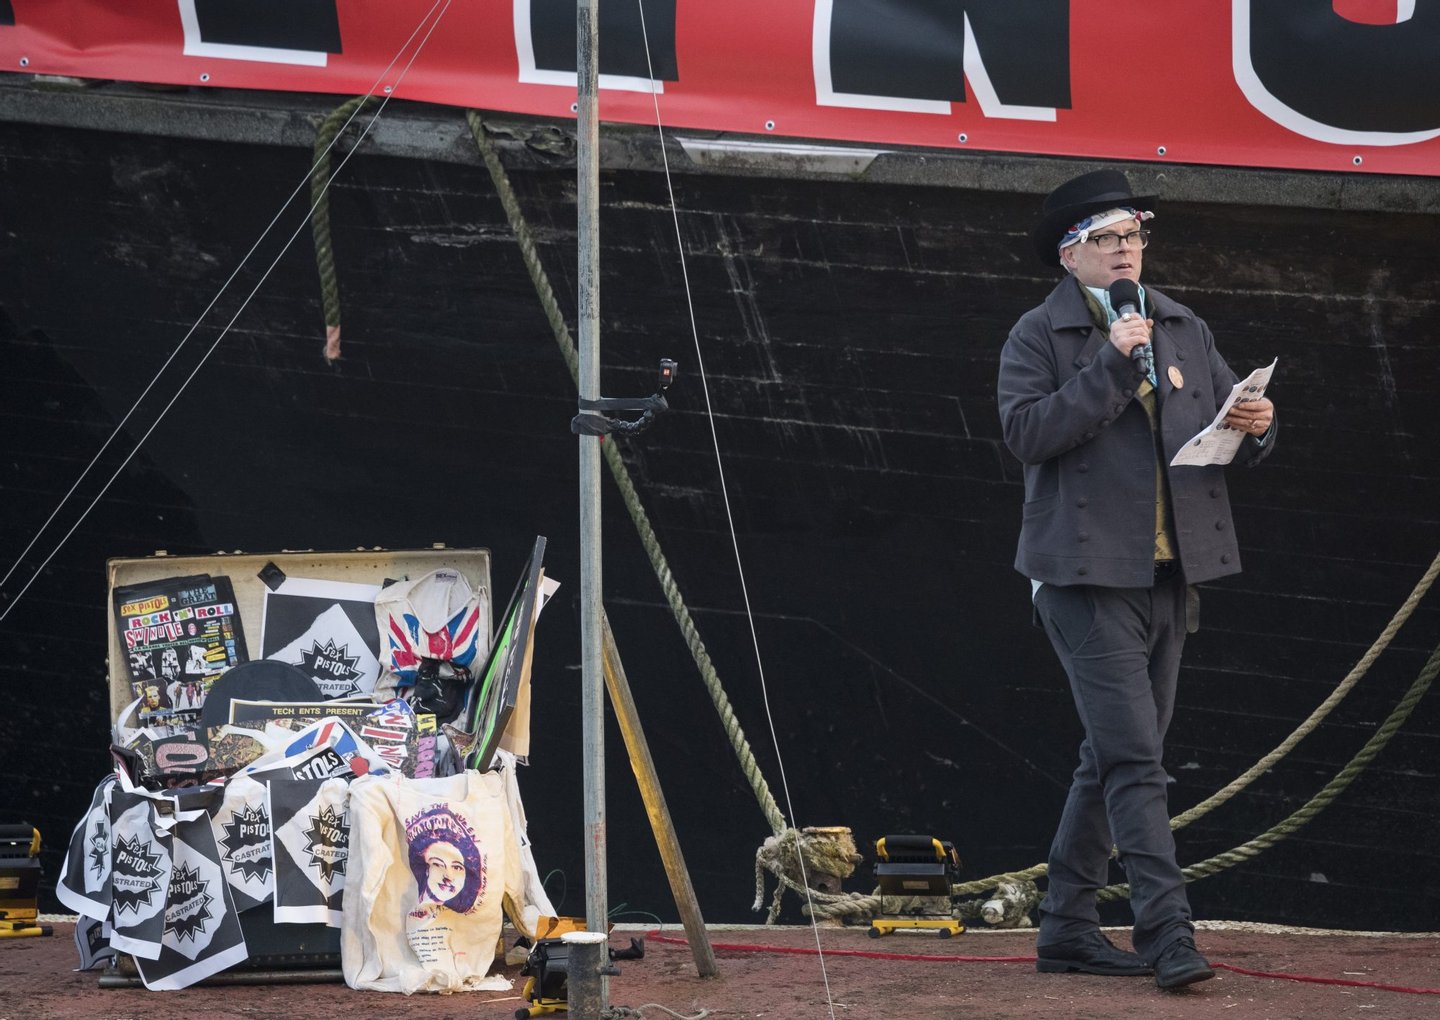 LONDON, ENGLAND - NOVEMBER 26: Joe Corre, the son of Vivienne Westwood and Sex Pistols creator Malcolm McLaren prepares to burn his entire Â£5 million punk collection on November 26, 2016 in London, England. Joe Corre burnt the rare punk memorabilia in protest saying punk has no solutions for today's youth and is 'conning the young'. (Photo by John Phillips/Getty Images)